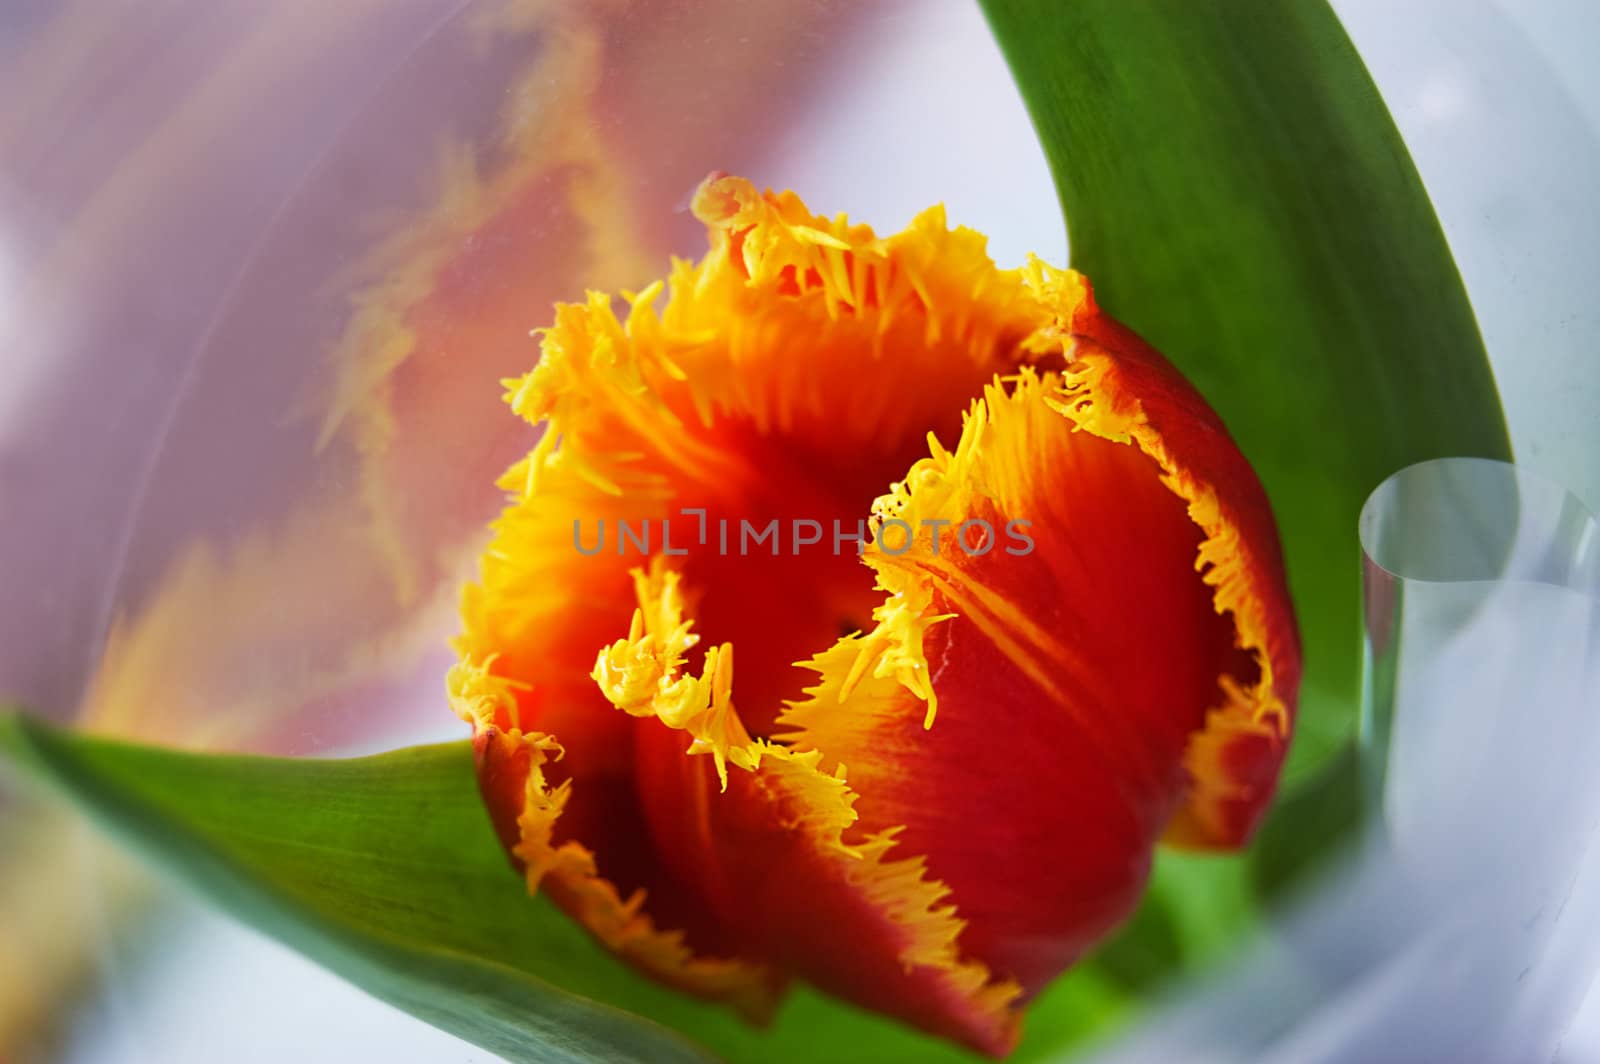 Red tulip with some reflexion in its wrap